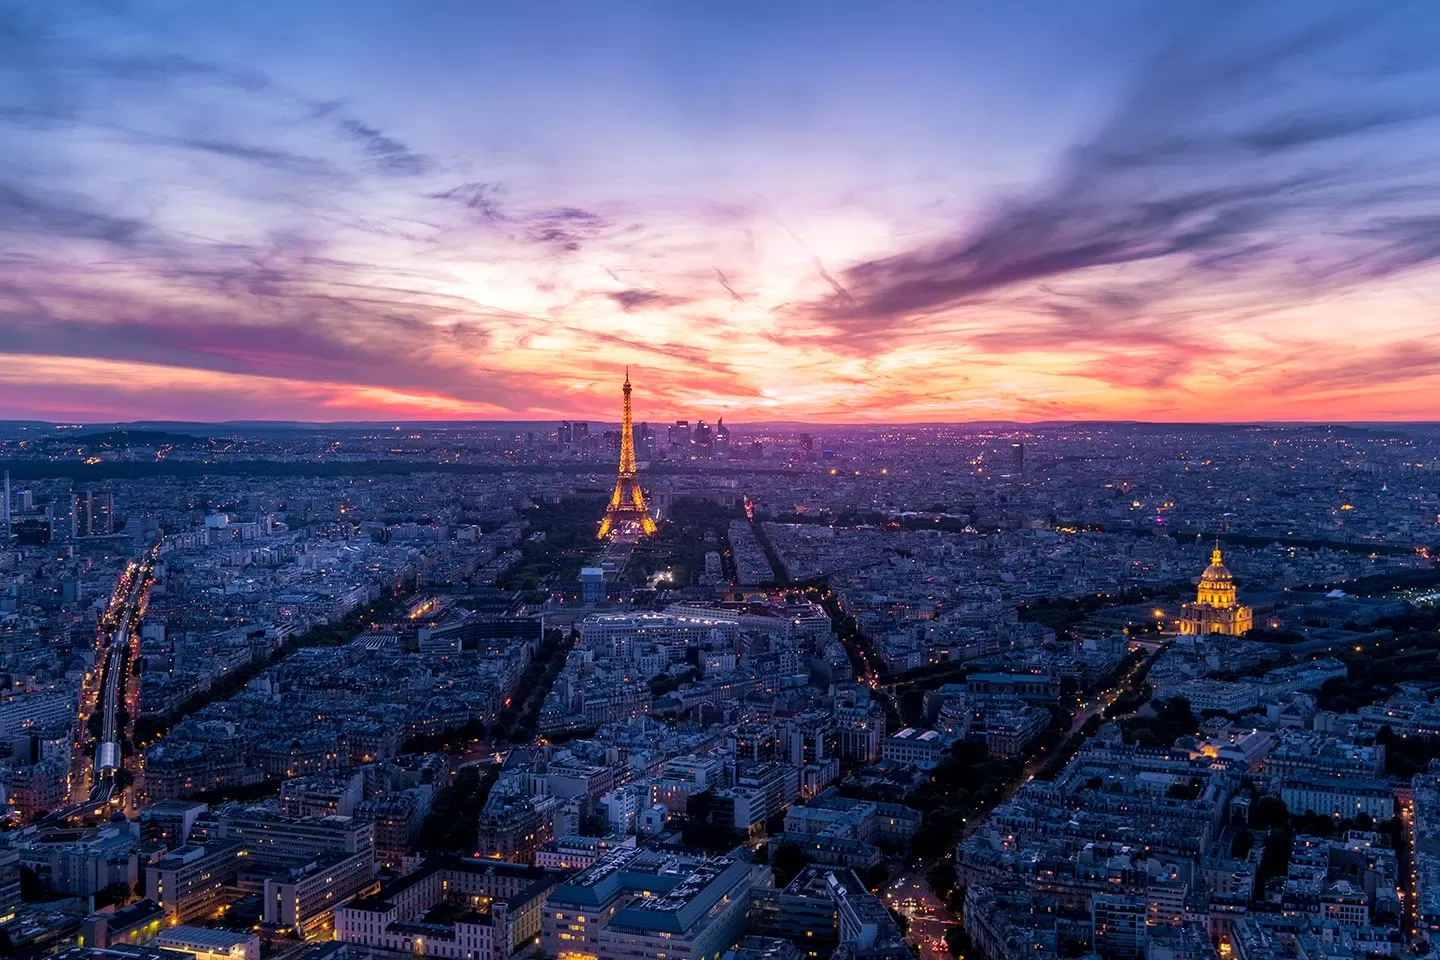 Sunset over the Eiffel Tower - Why was Eiffel Tower built?